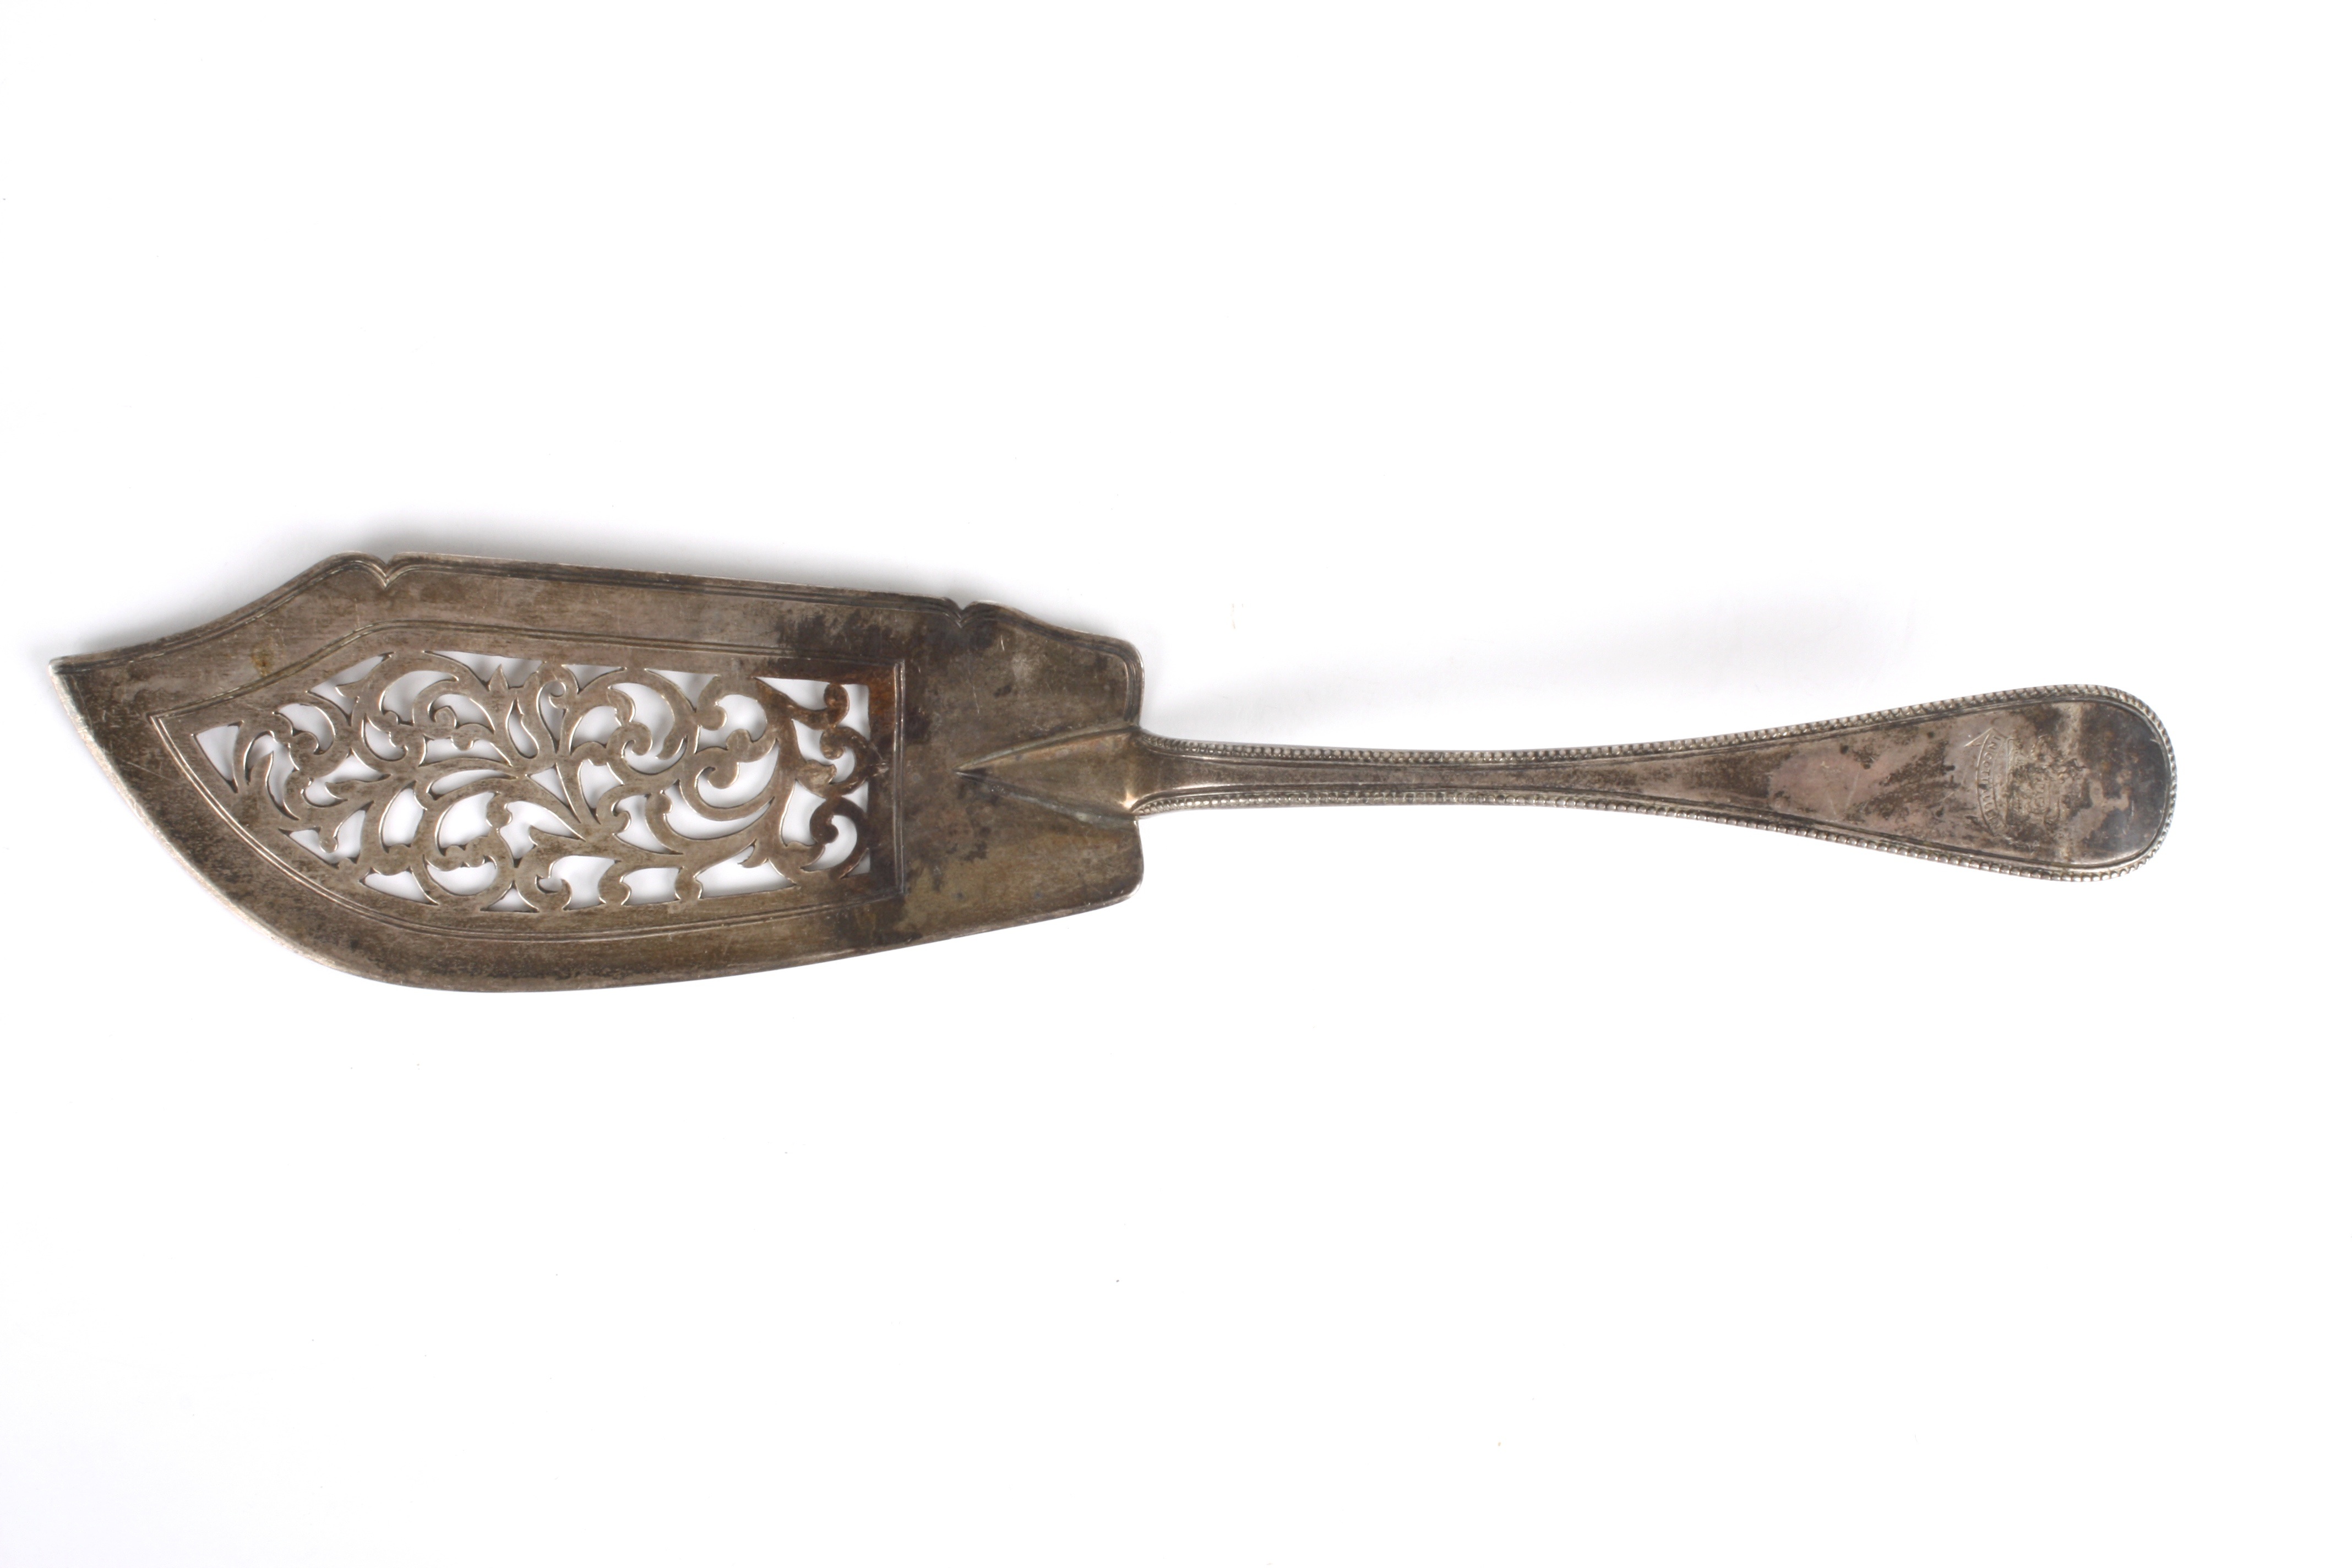 A Victorian Old English pattern silver fish slice
hallmarked 1857, with threaded, pierced and